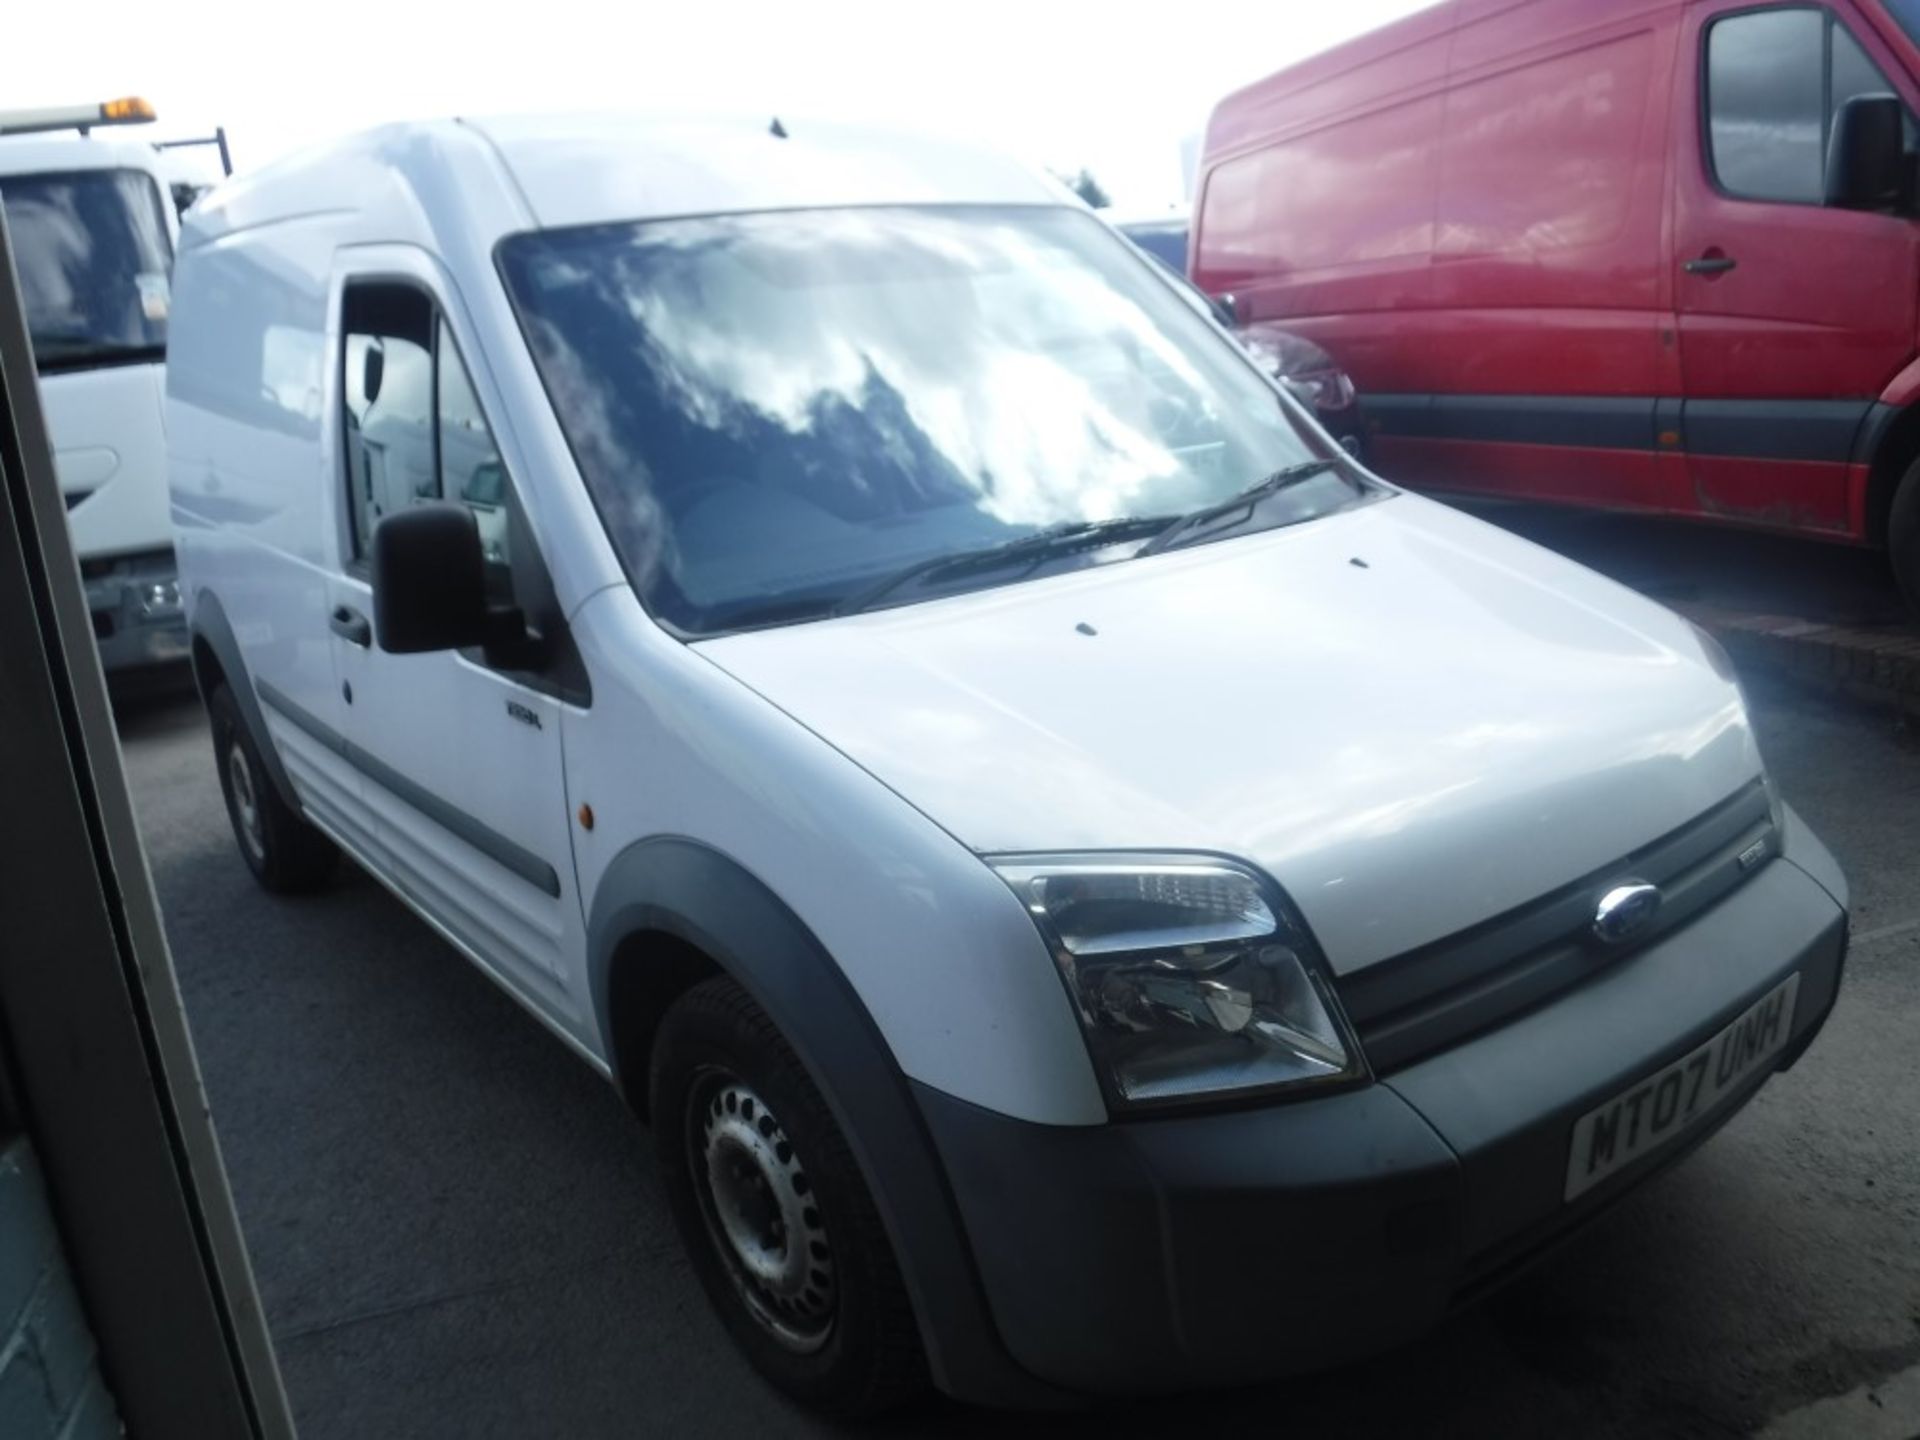 07 reg FORD TRANSIT CONNECT T230 (DIRECT COUNCIL) 1ST REG 07/07, 48359M, V5 HERE, 1 OWNER FROM